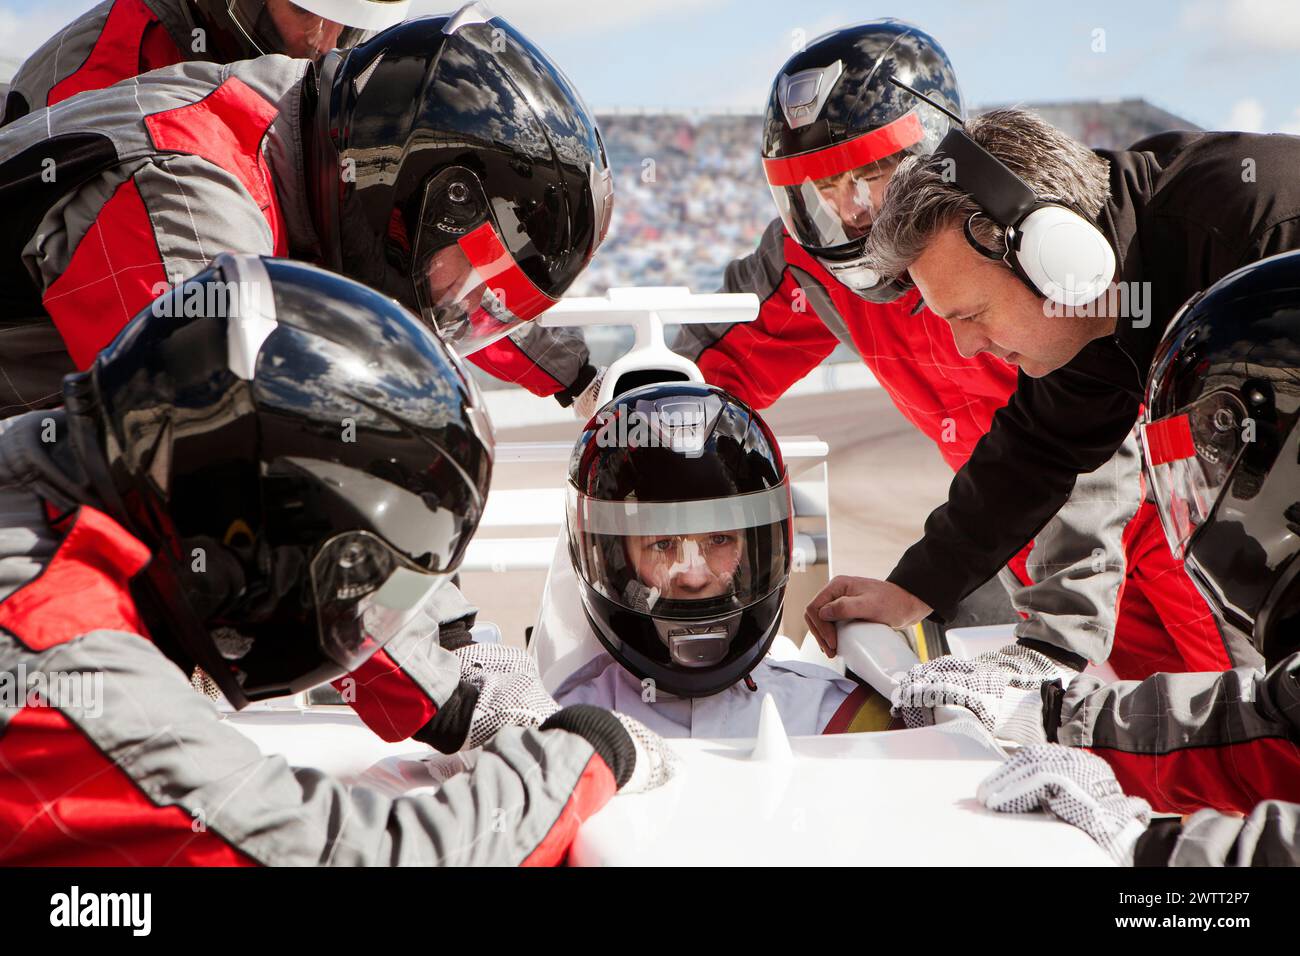 Race car driver getting ready for a big race with the pit crew team huddled around. Stock Photo